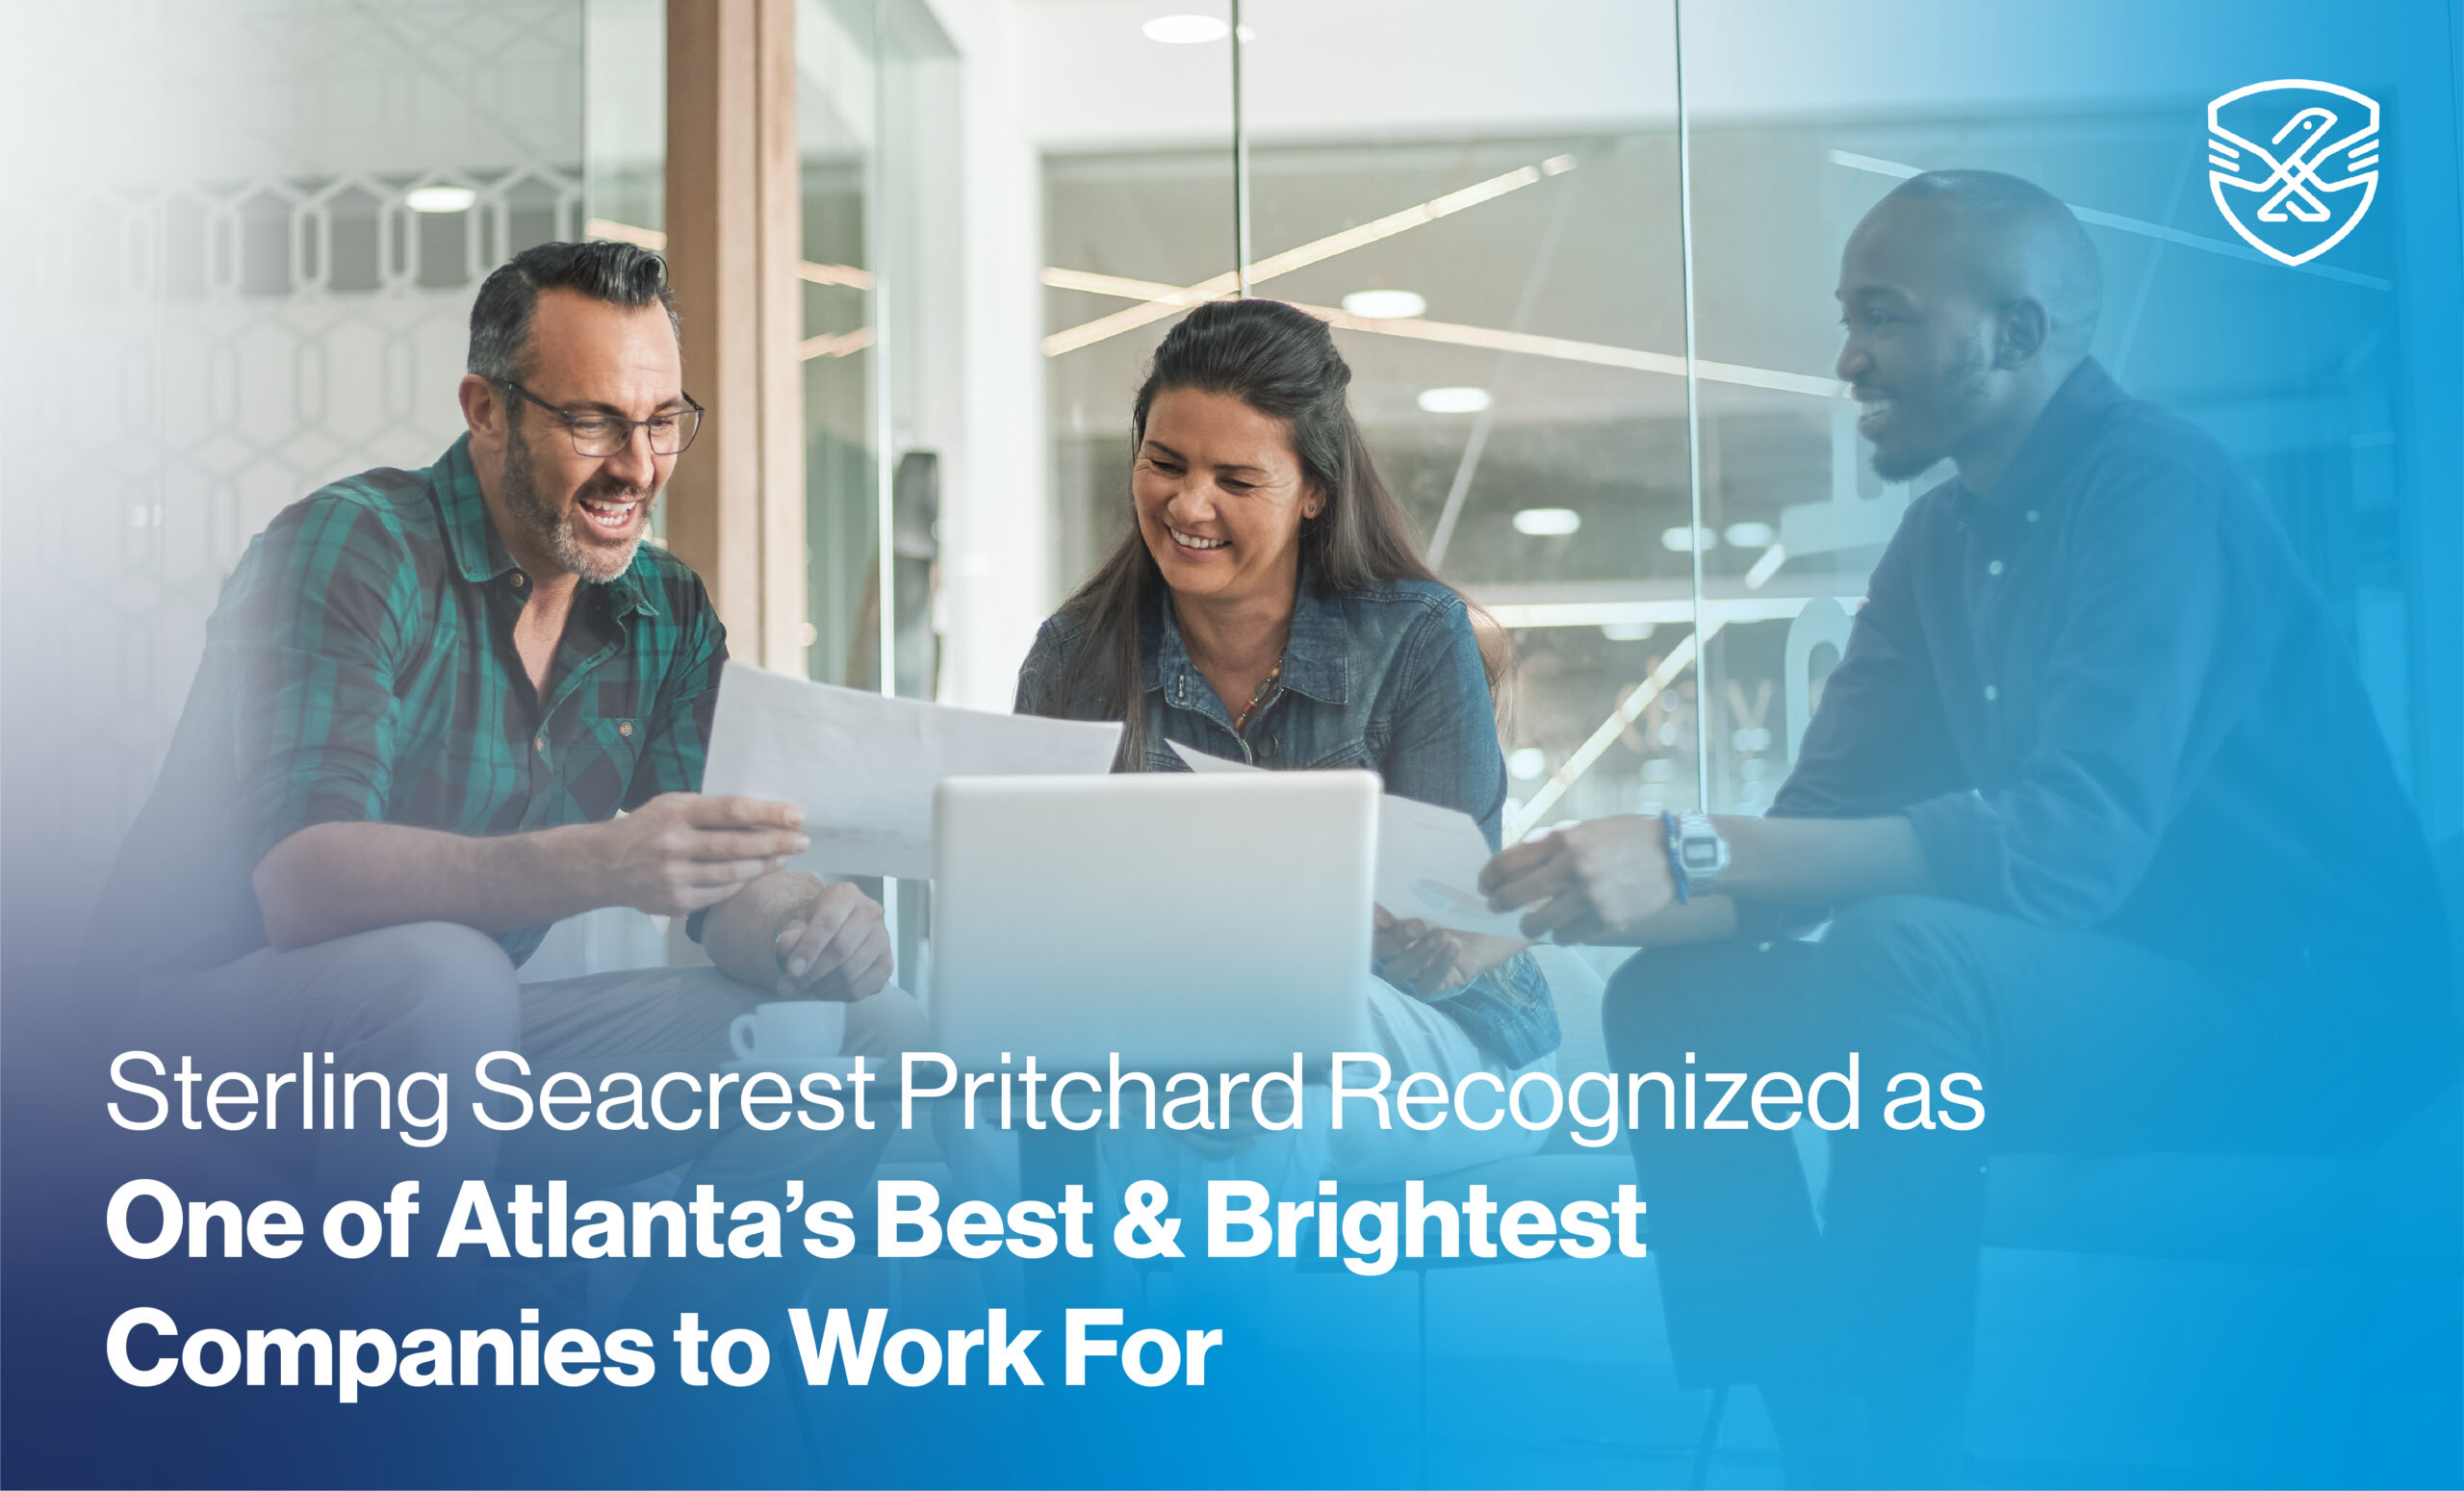 SSP Recognized as One of Atlanta's Best & Brightest Companies to Work For